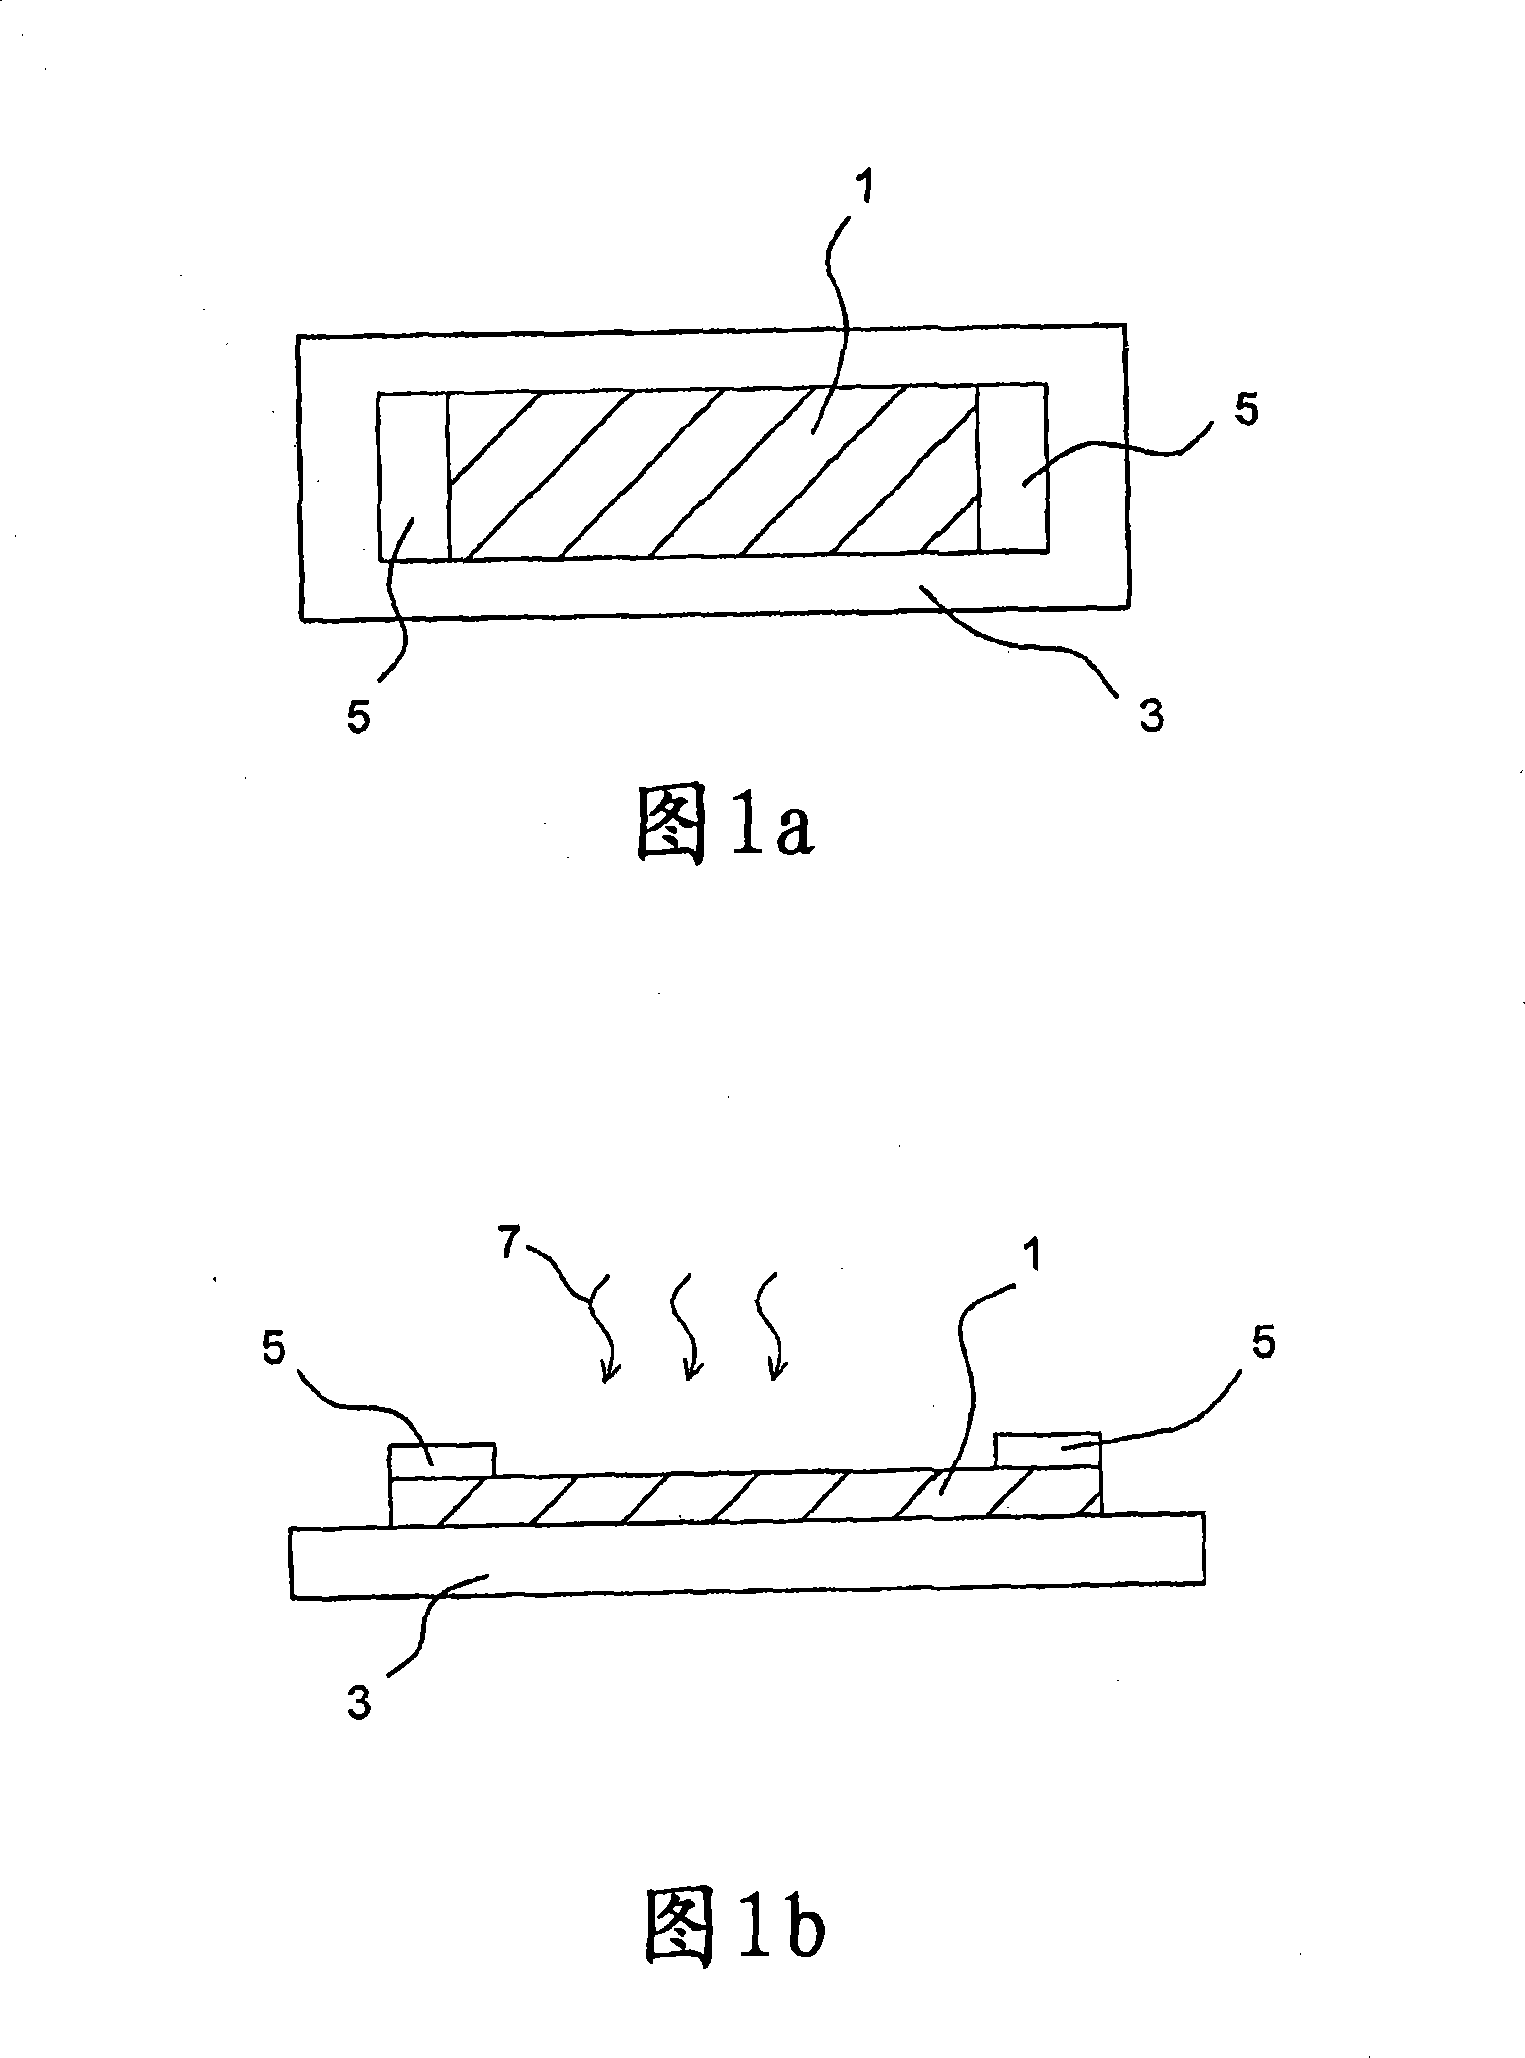 Semiconductor materials and methods of producing them